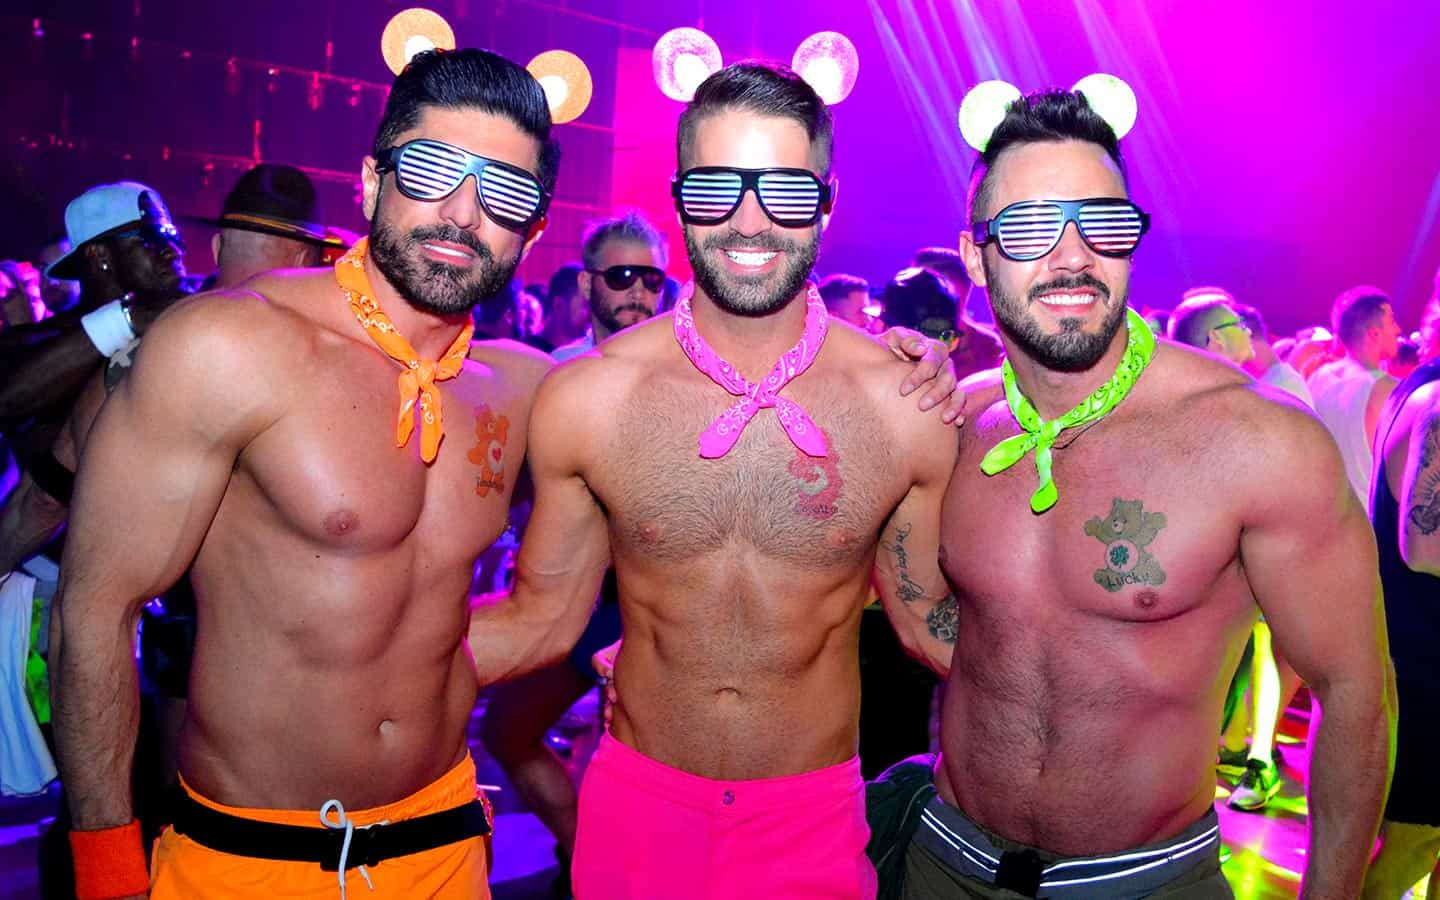 Three shirtless men dancing at a vibrant circuit party during the Miami Winter Party Festival, a celebration of LGBTQ+ culture and unity.